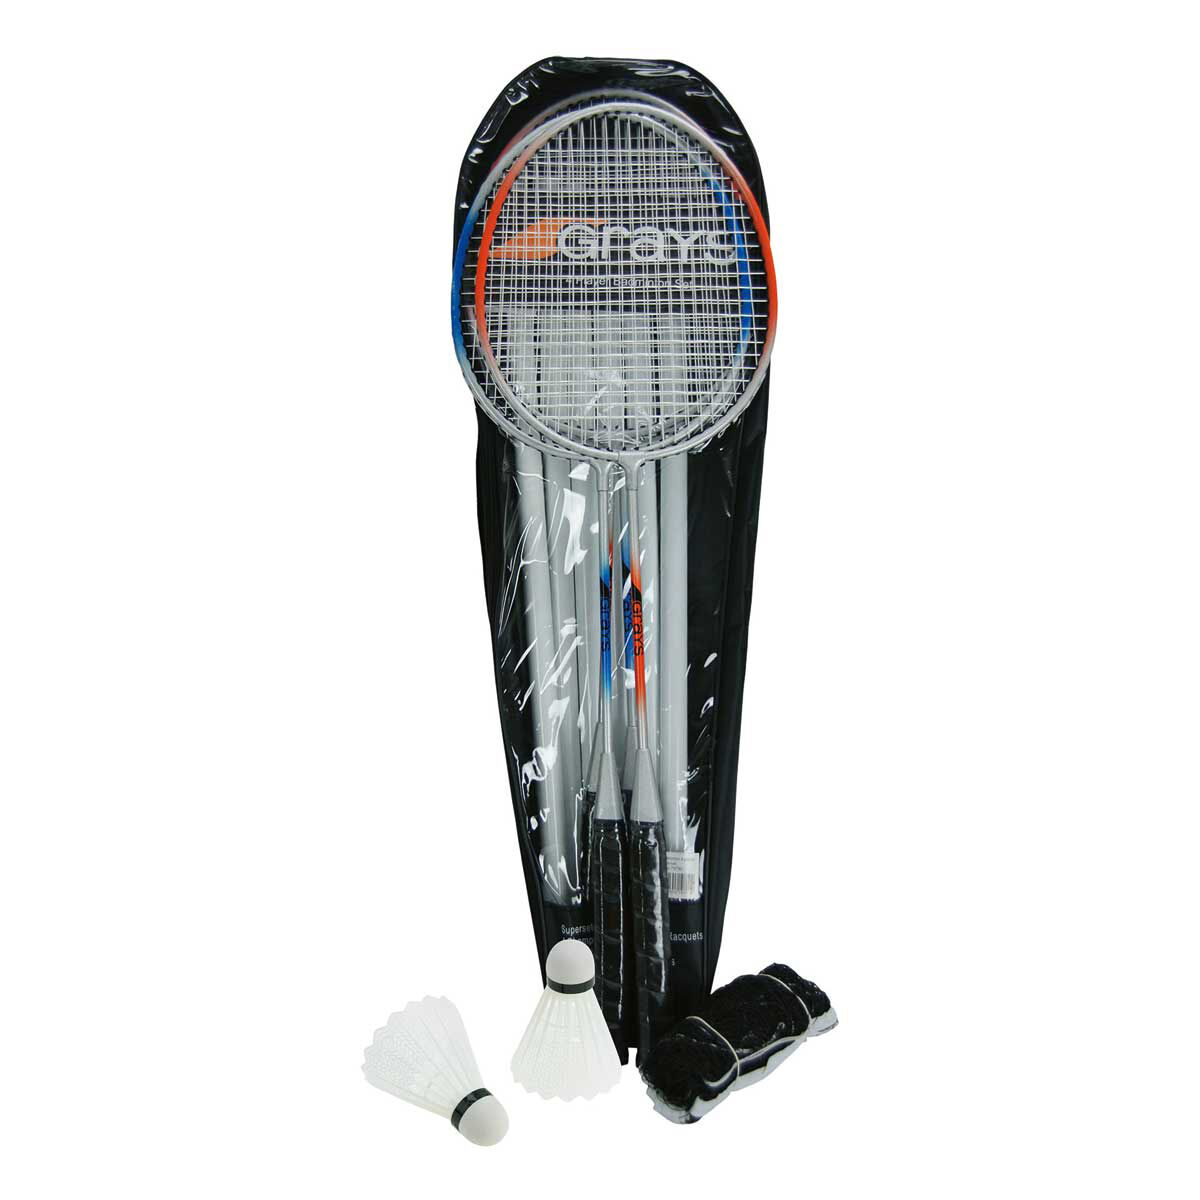 Free Delivery Aus Wide Grays 4 Player Badminton Set 